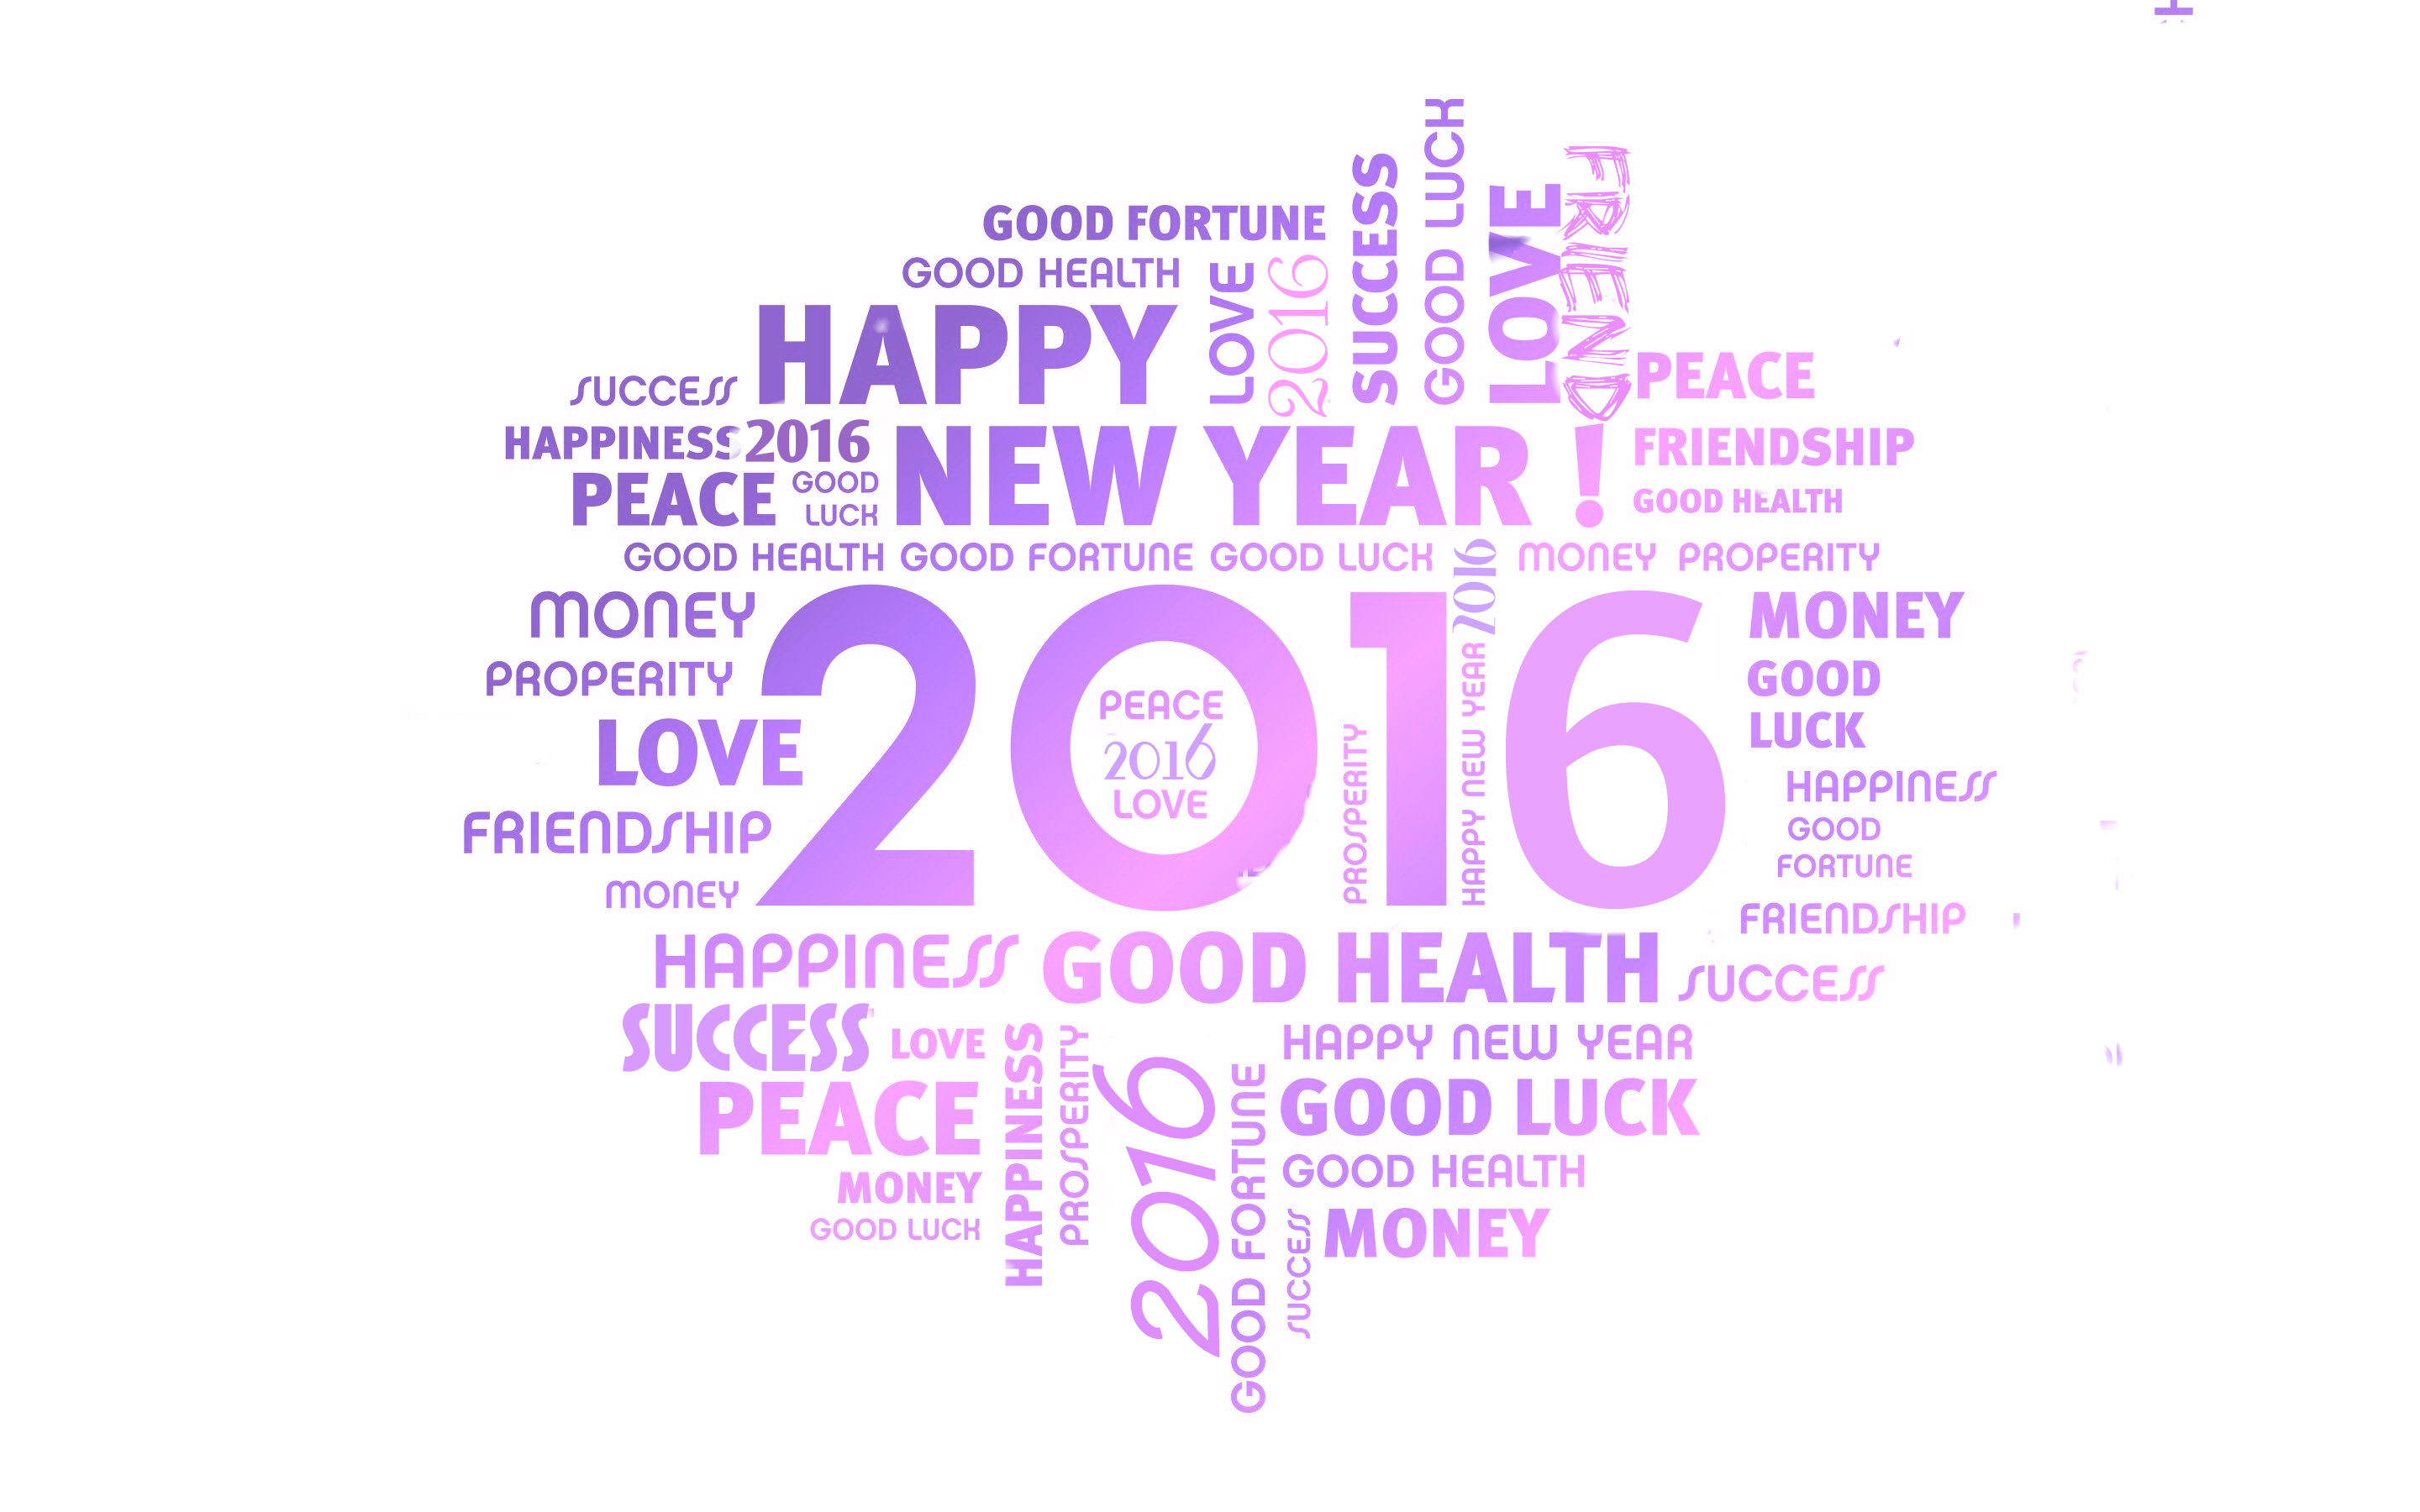 Happy-New-Year-2016-hd-Images-Wallpapers-Free-Download-11.jpg